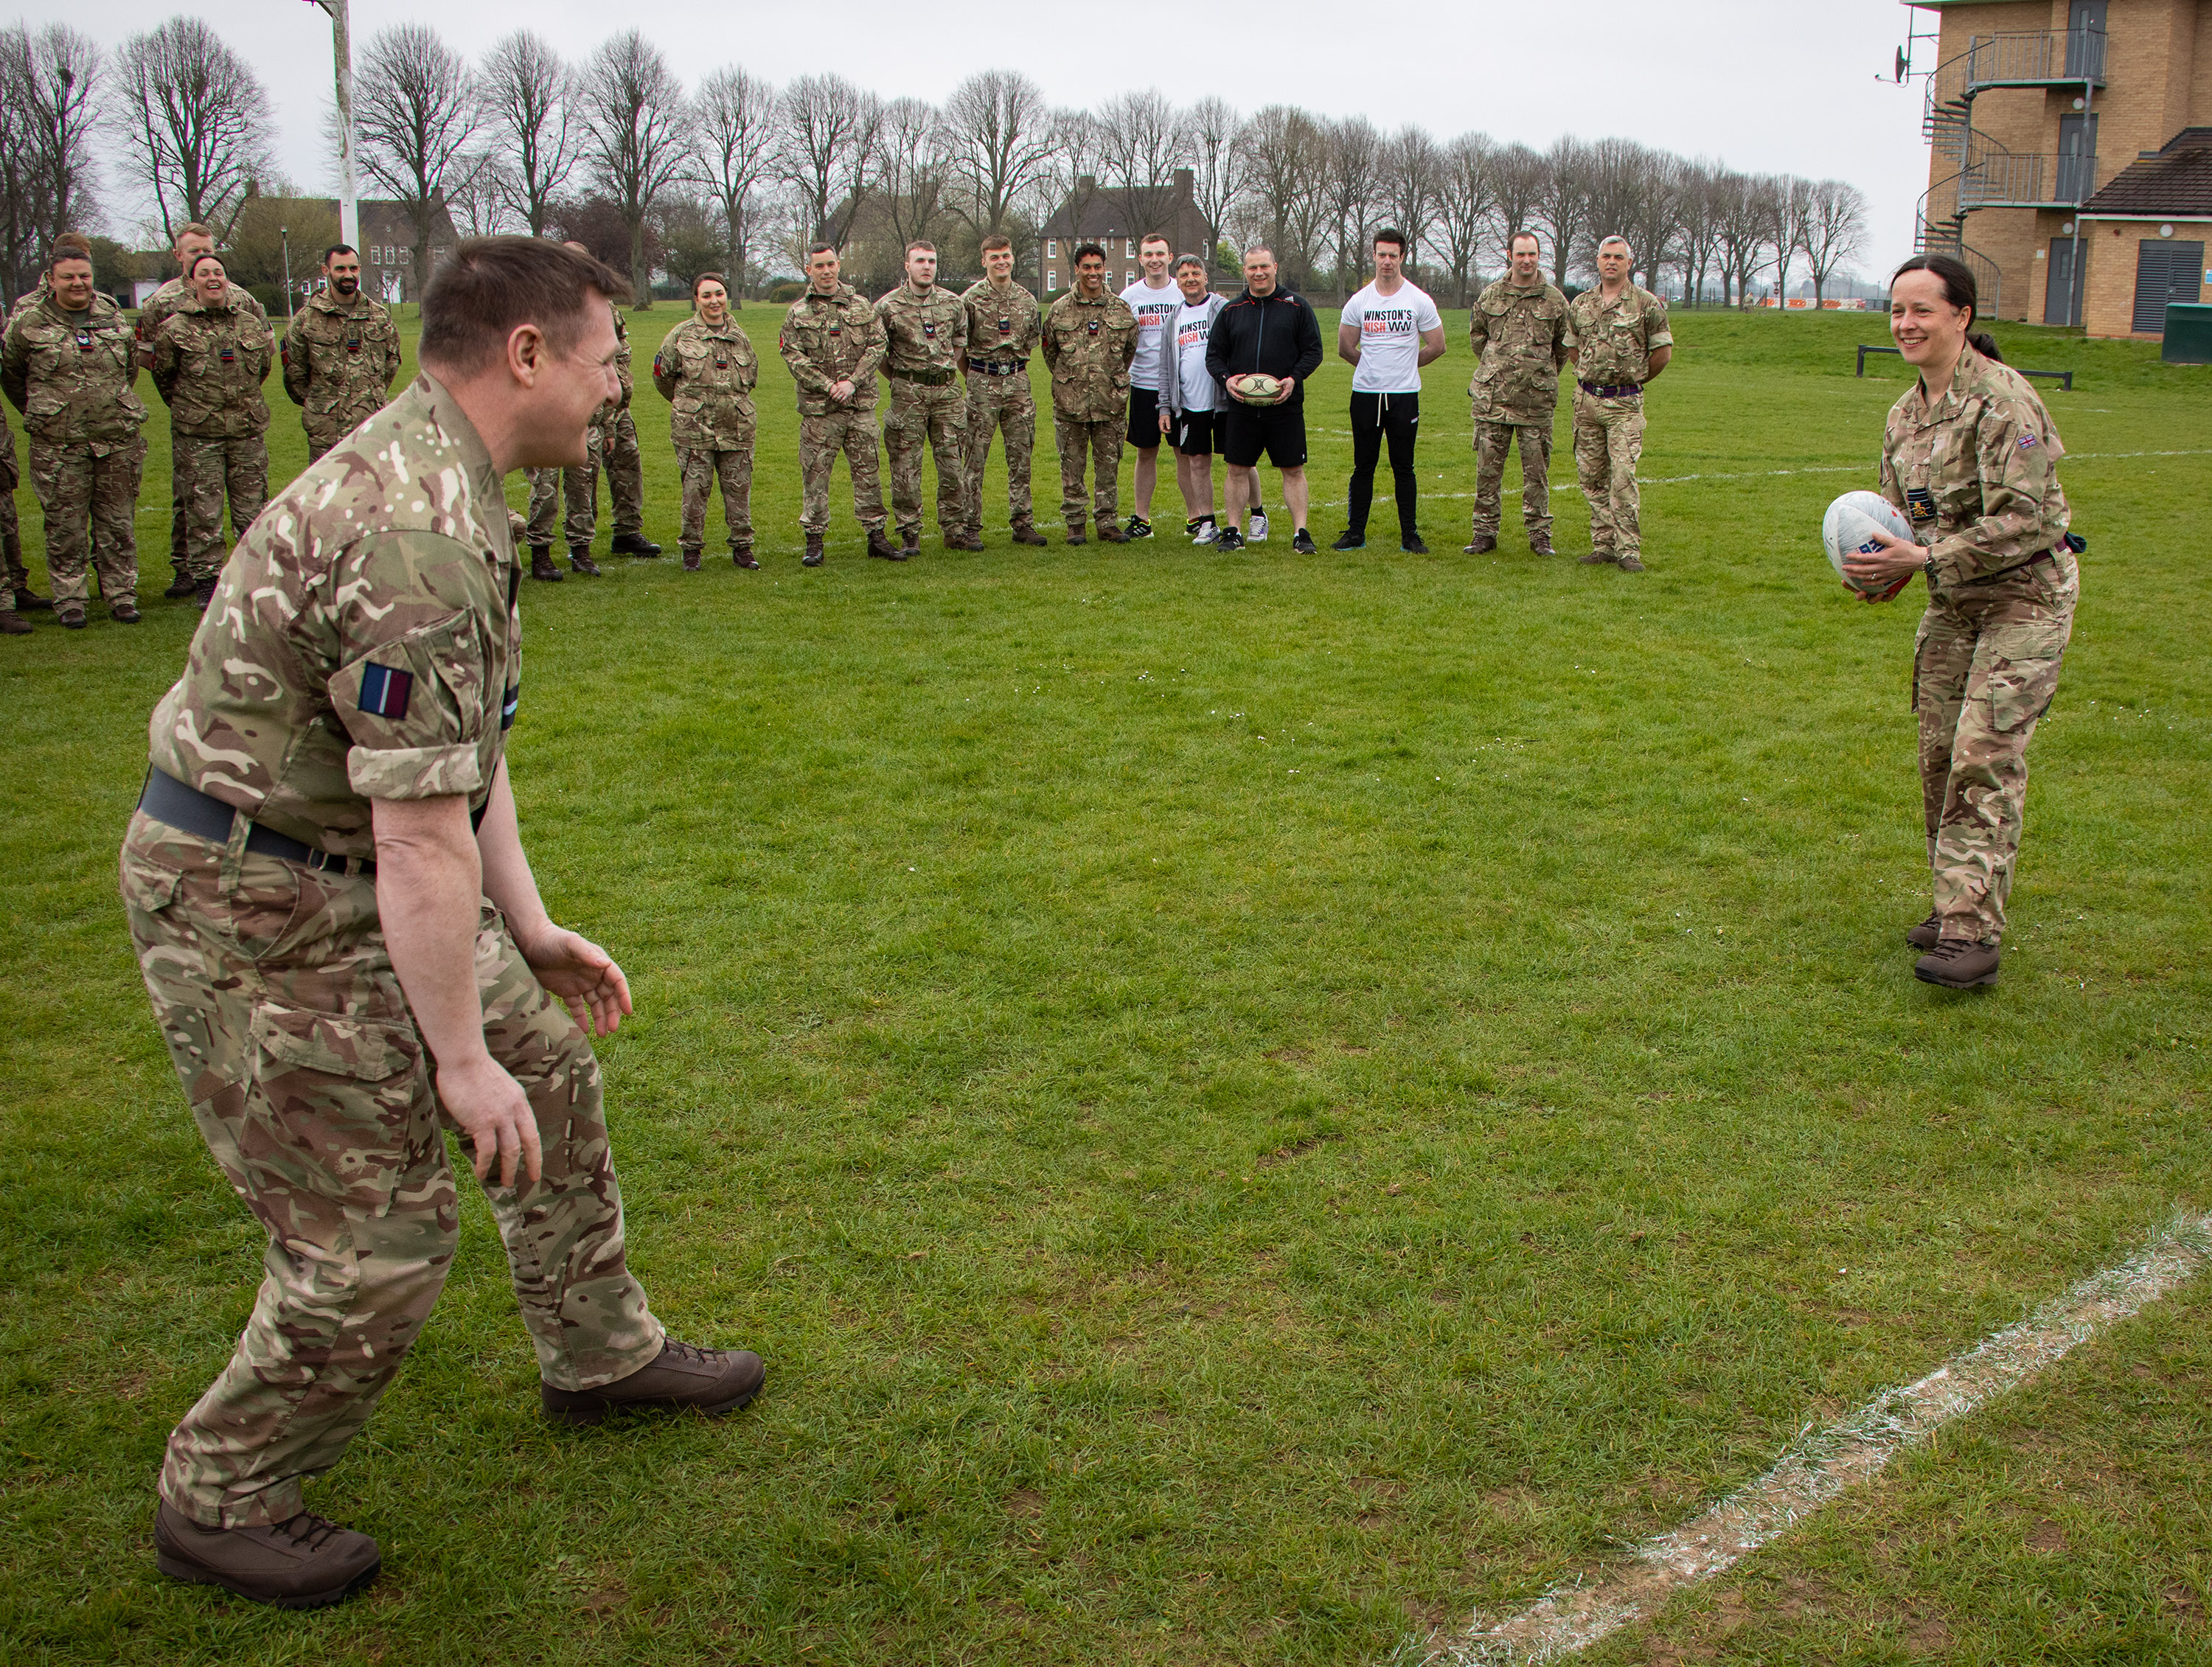 Personnel holds rugby ball to other.